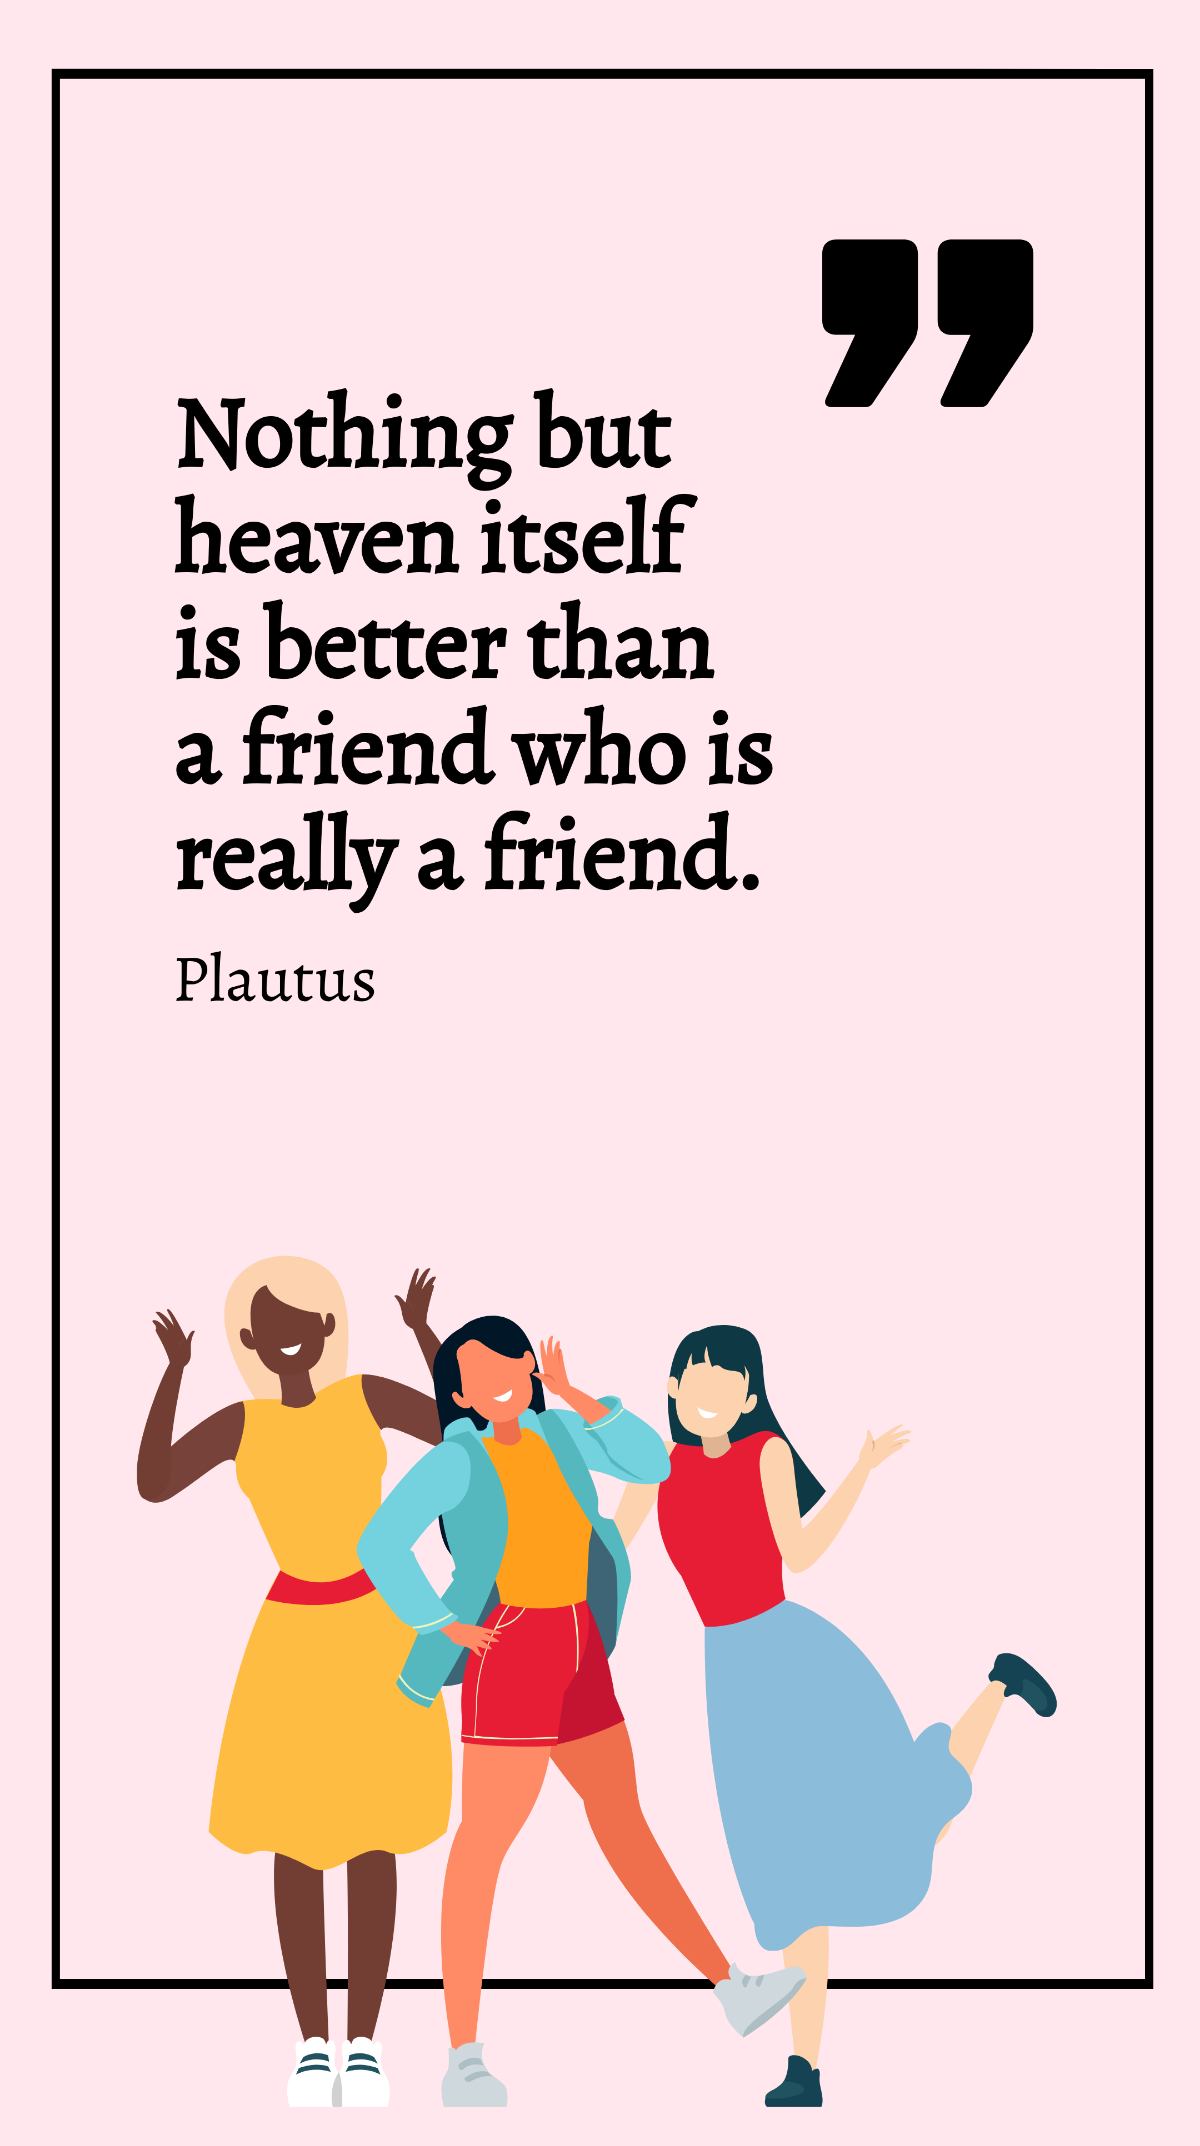 Plautus - Nothing but heaven itself is better than a friend who is really a friend. Template